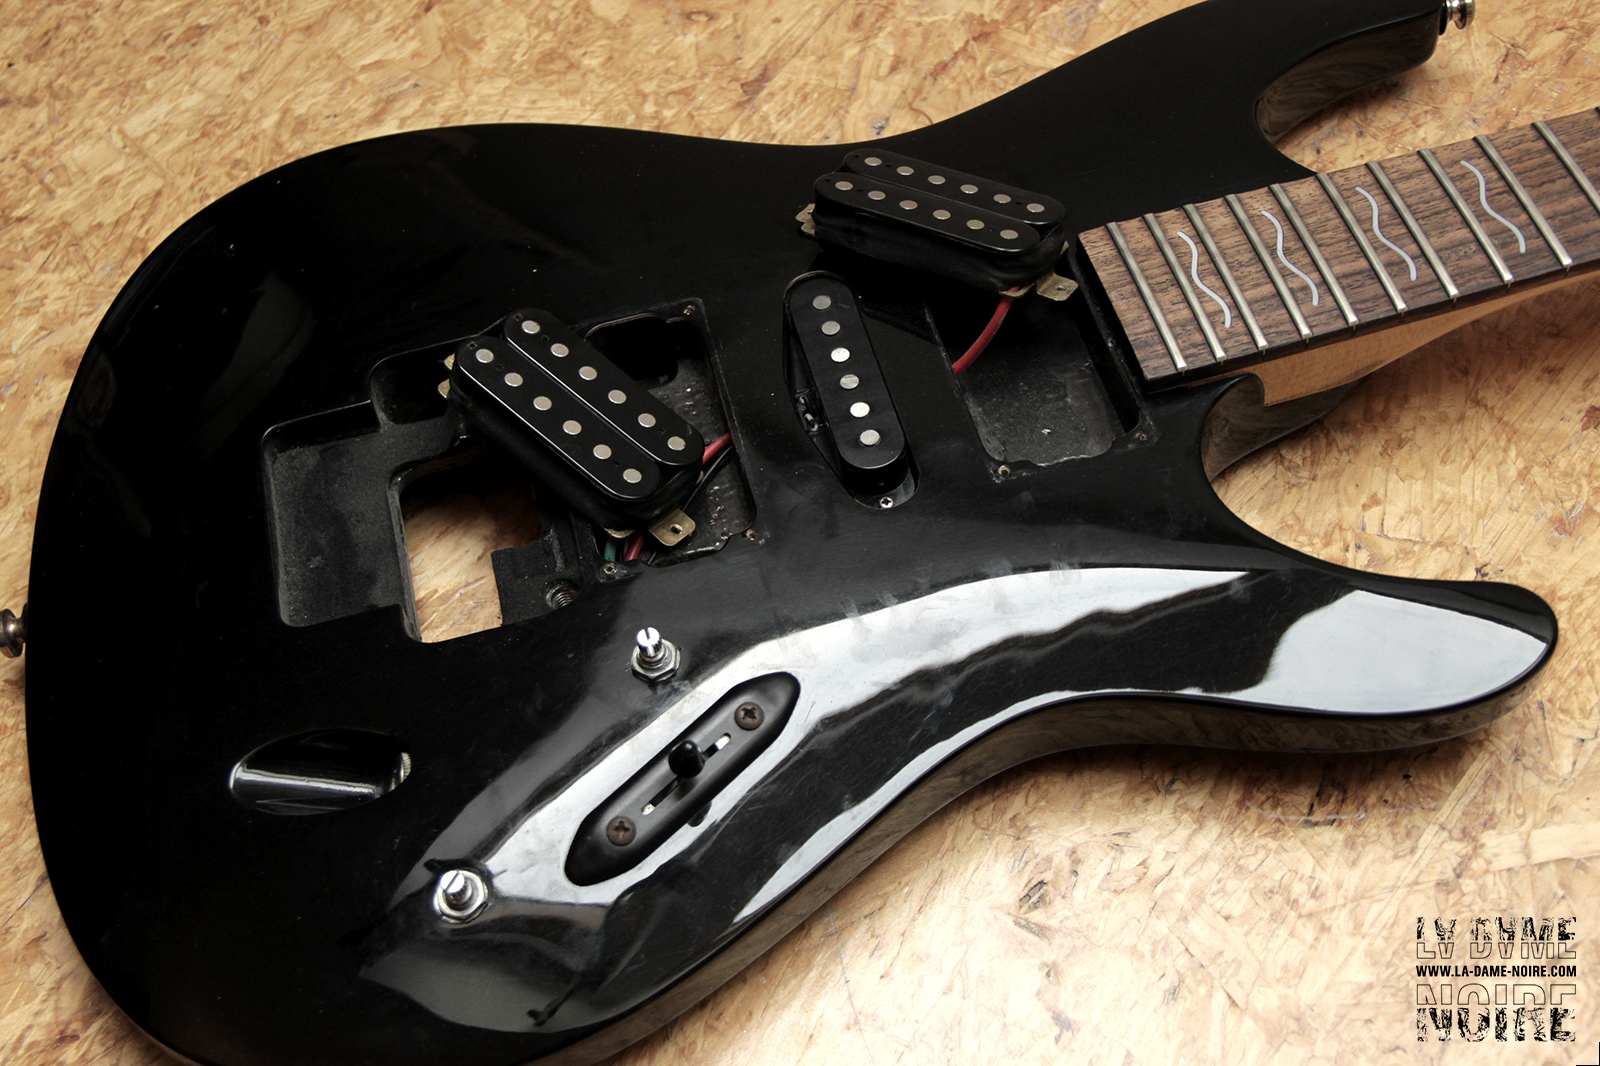 Body of Ibanez S470 guitar free from its ZR bridge